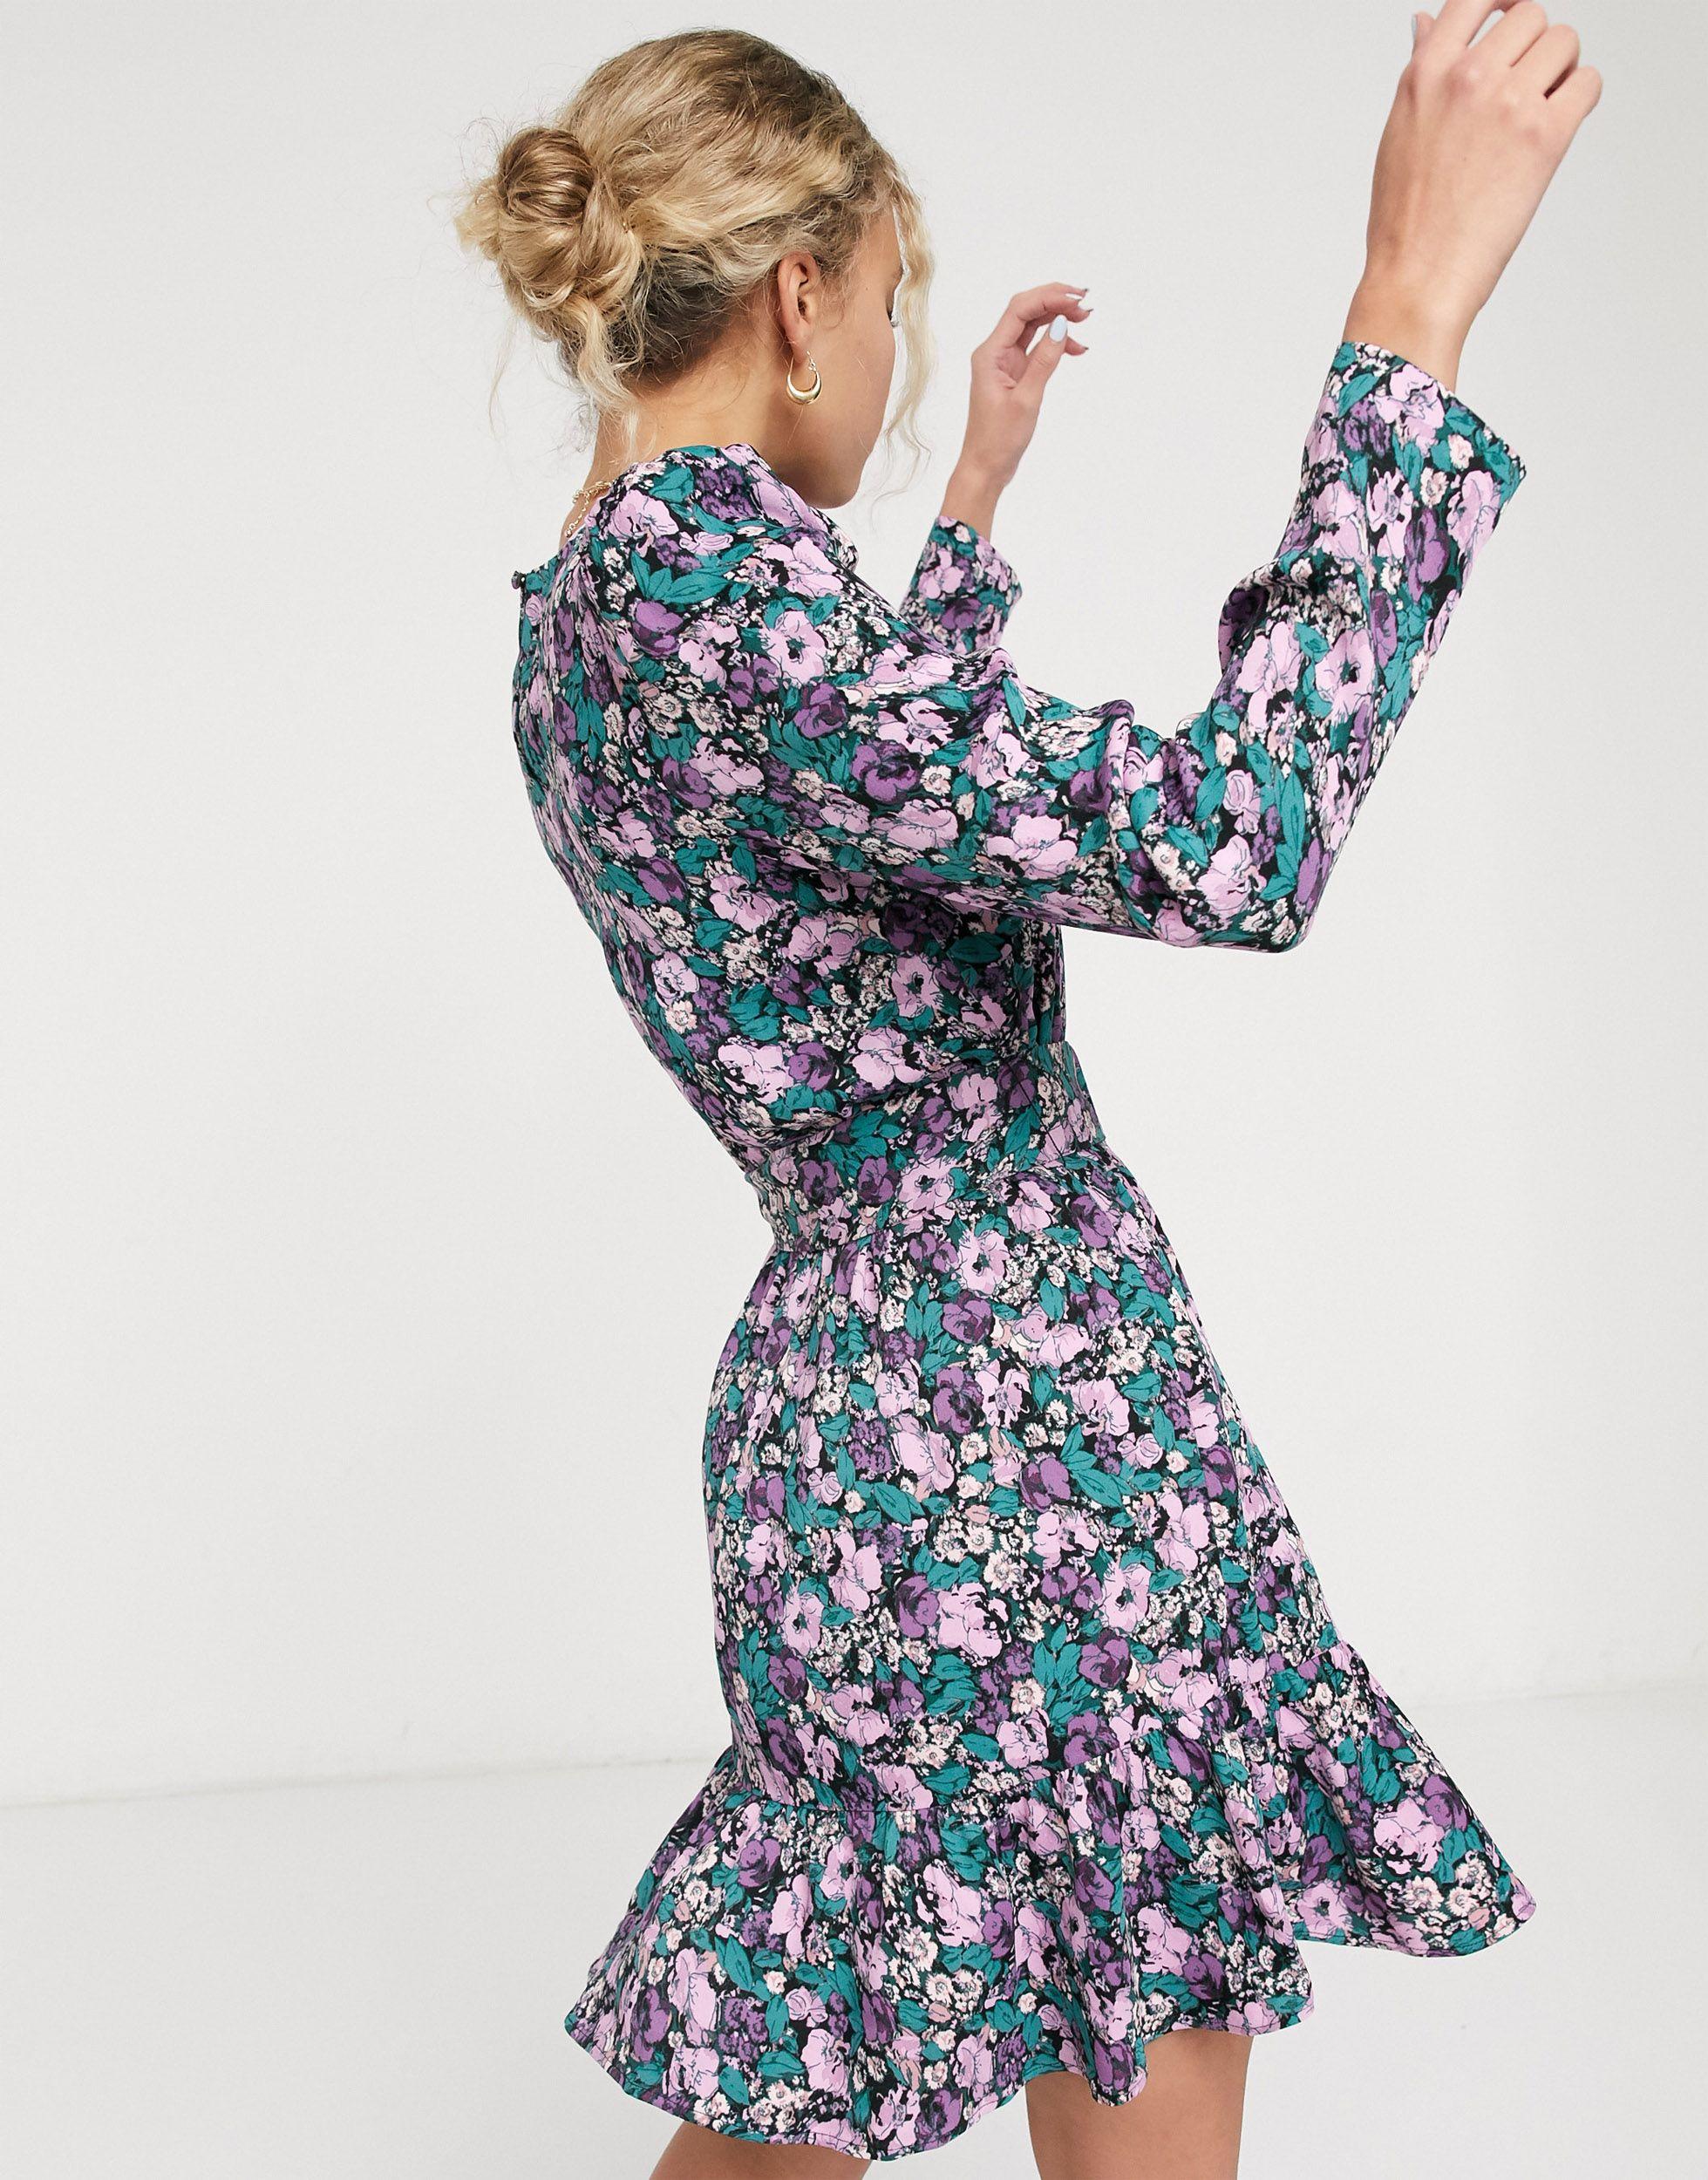 & Other Stories Floral Print Belted Mini Dress in Blue | Lyst UK